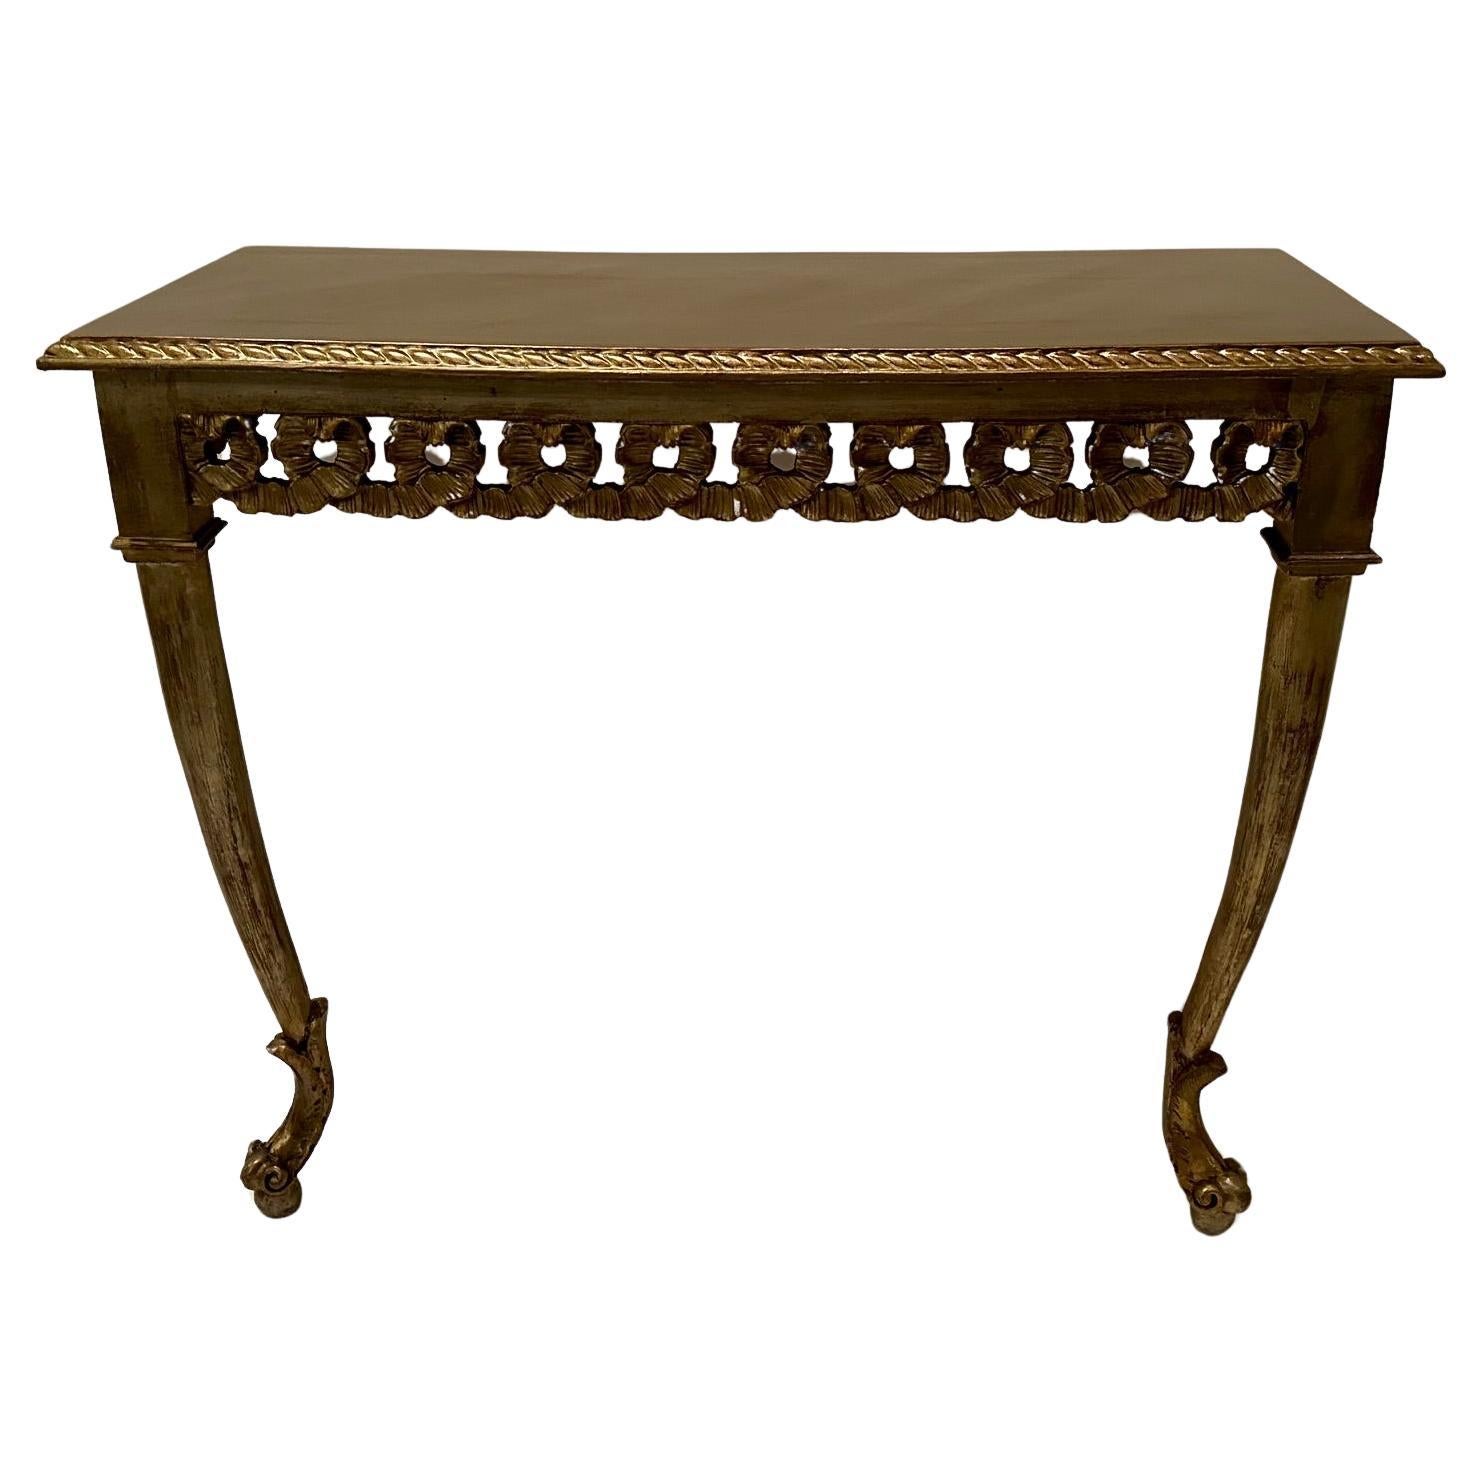 Carved Italian Gold & Silver Leaf Wall Mounted Console Table